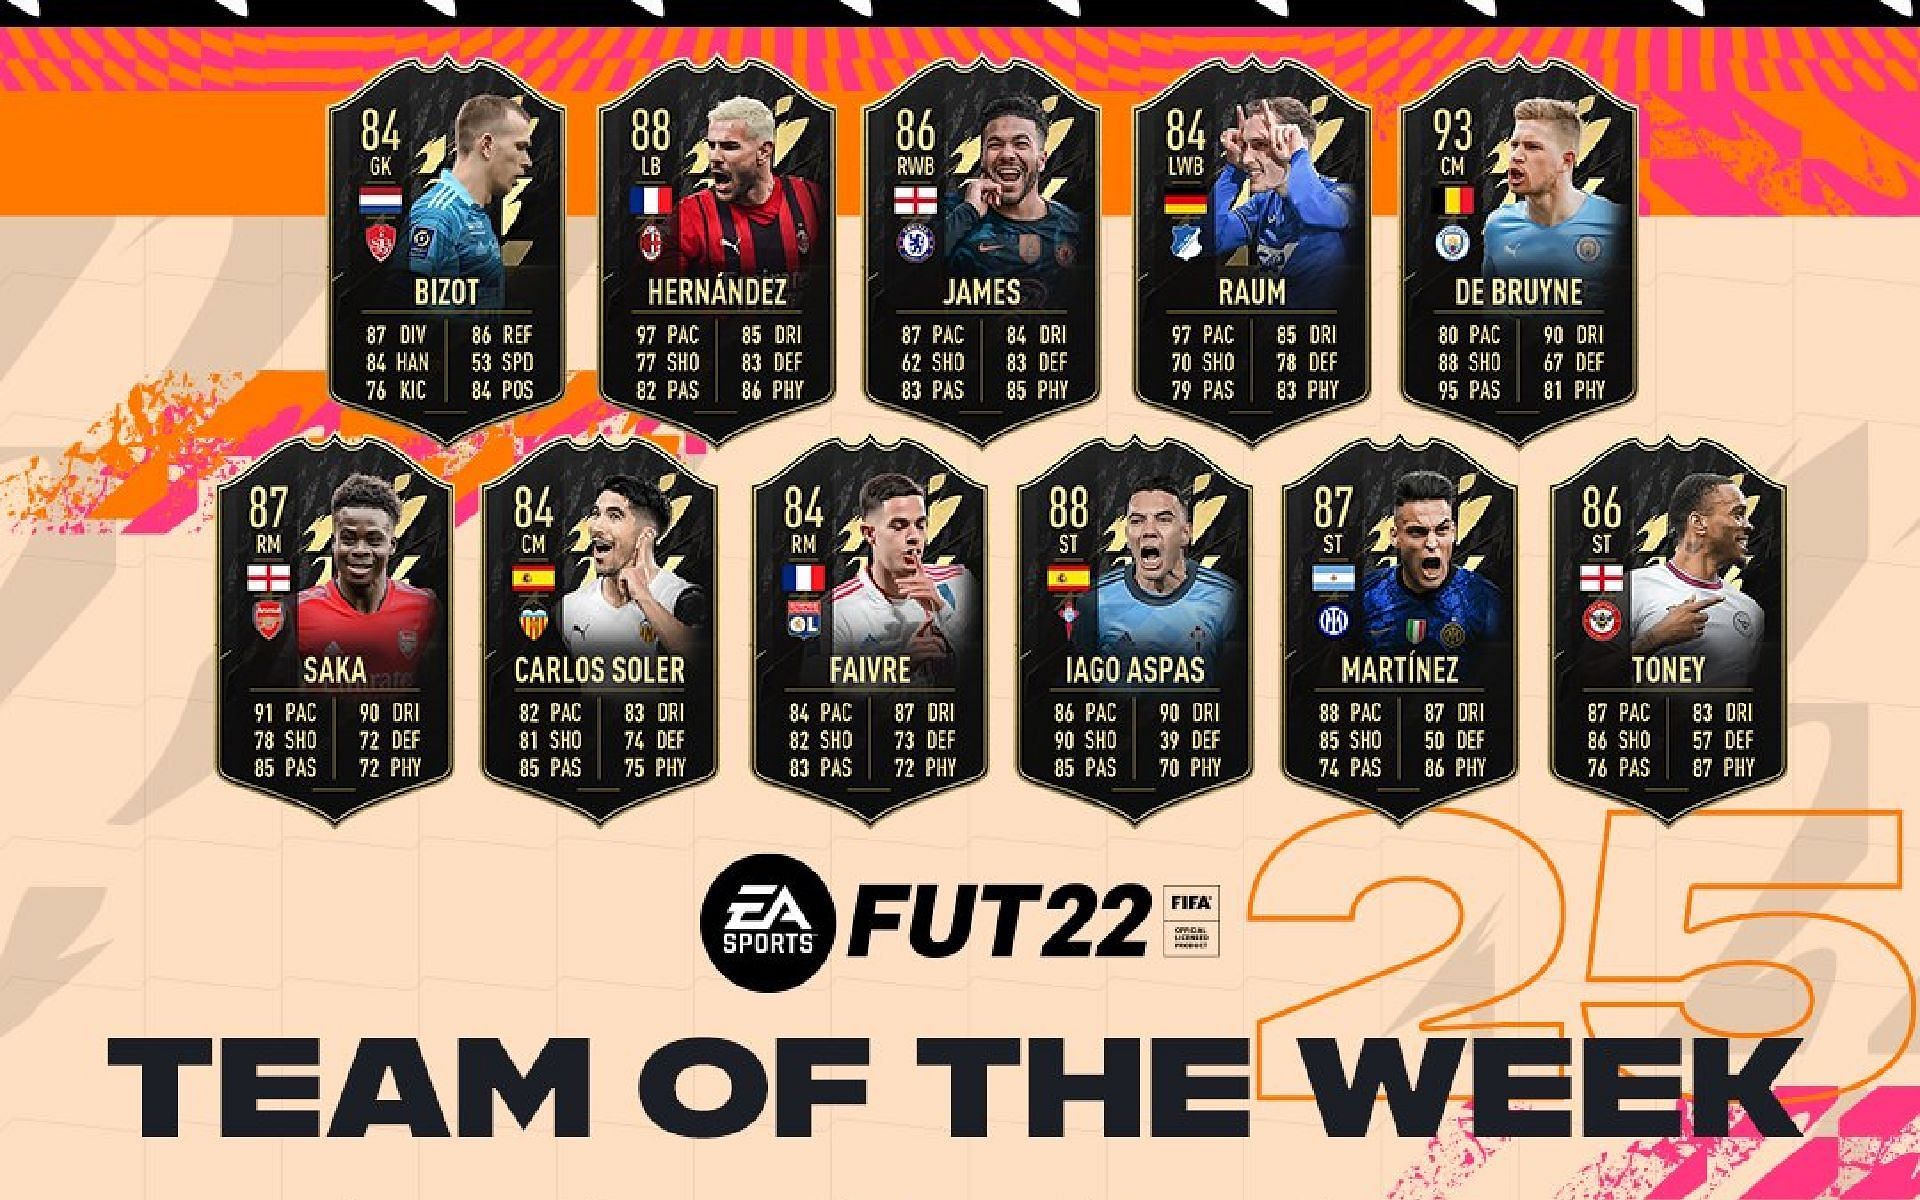 FIFA 22 Ultimate Team: Full list of Team Of The Week 25 (TOTW 25) cards revealed in FUT 22